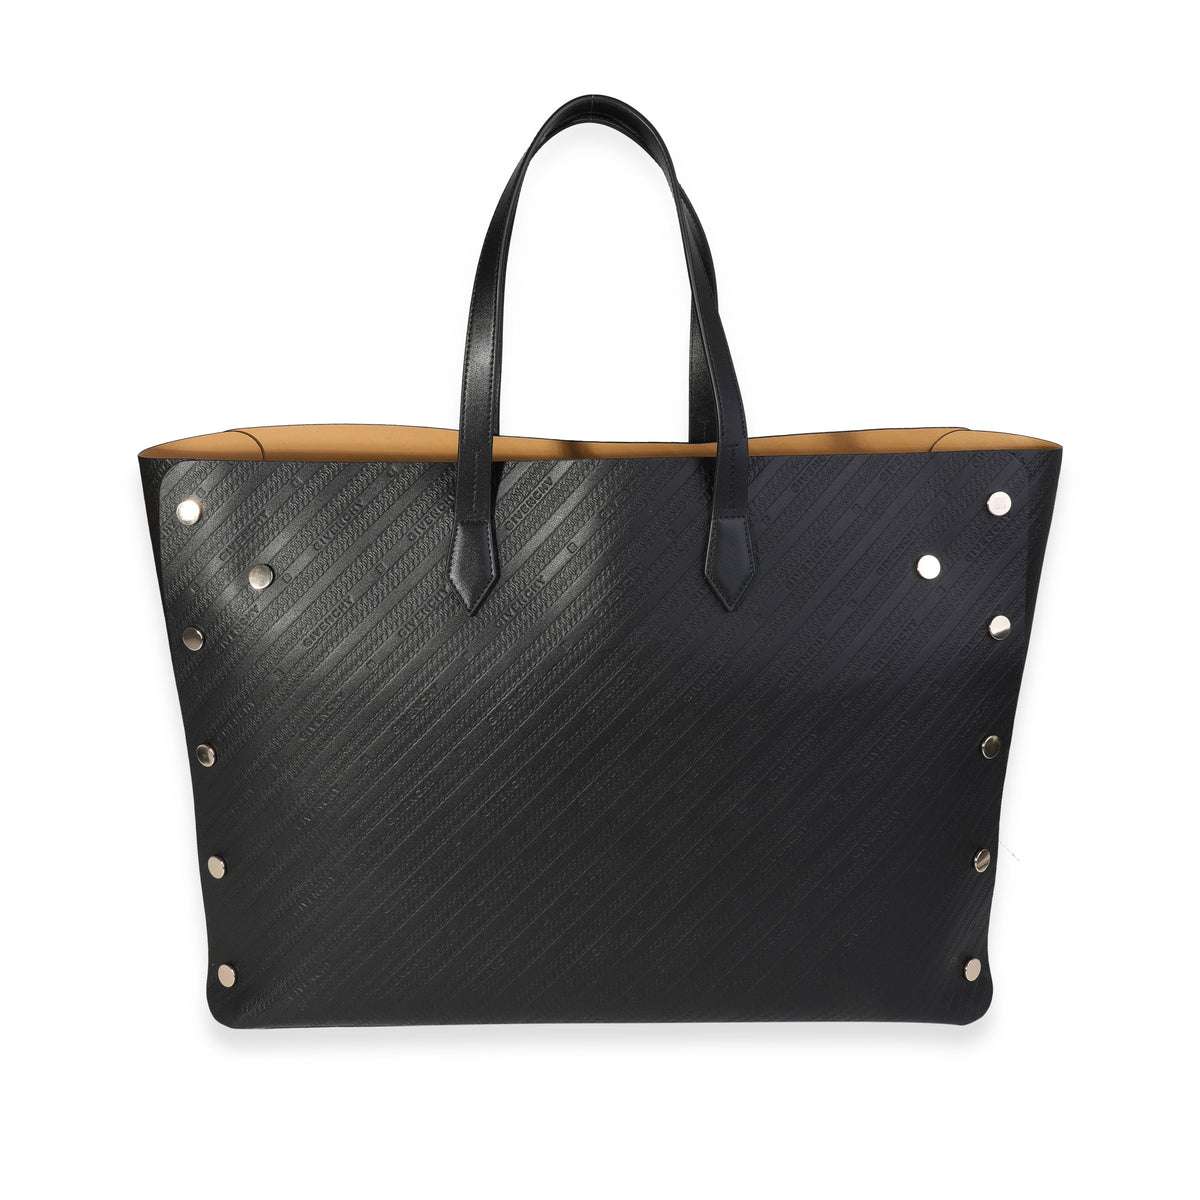 Givenchy Black Embossed Leather Large Bond Shopper Tote